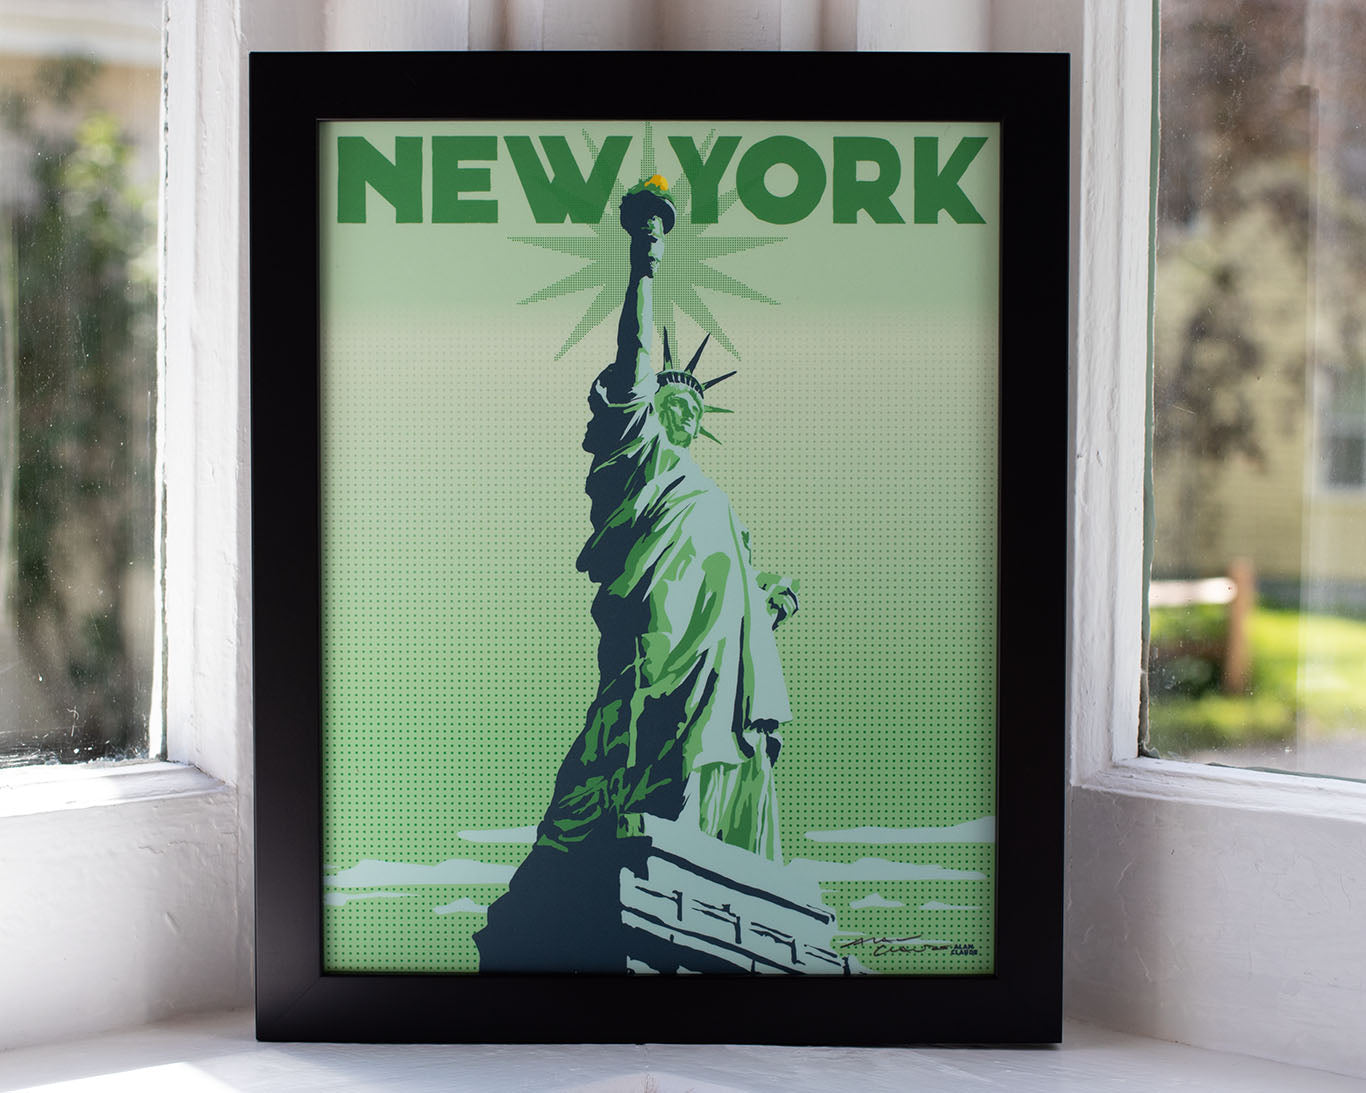 Statue Of Liberty Framed Art Print 8" x 10" Travel Poster By Alan Claude - New York